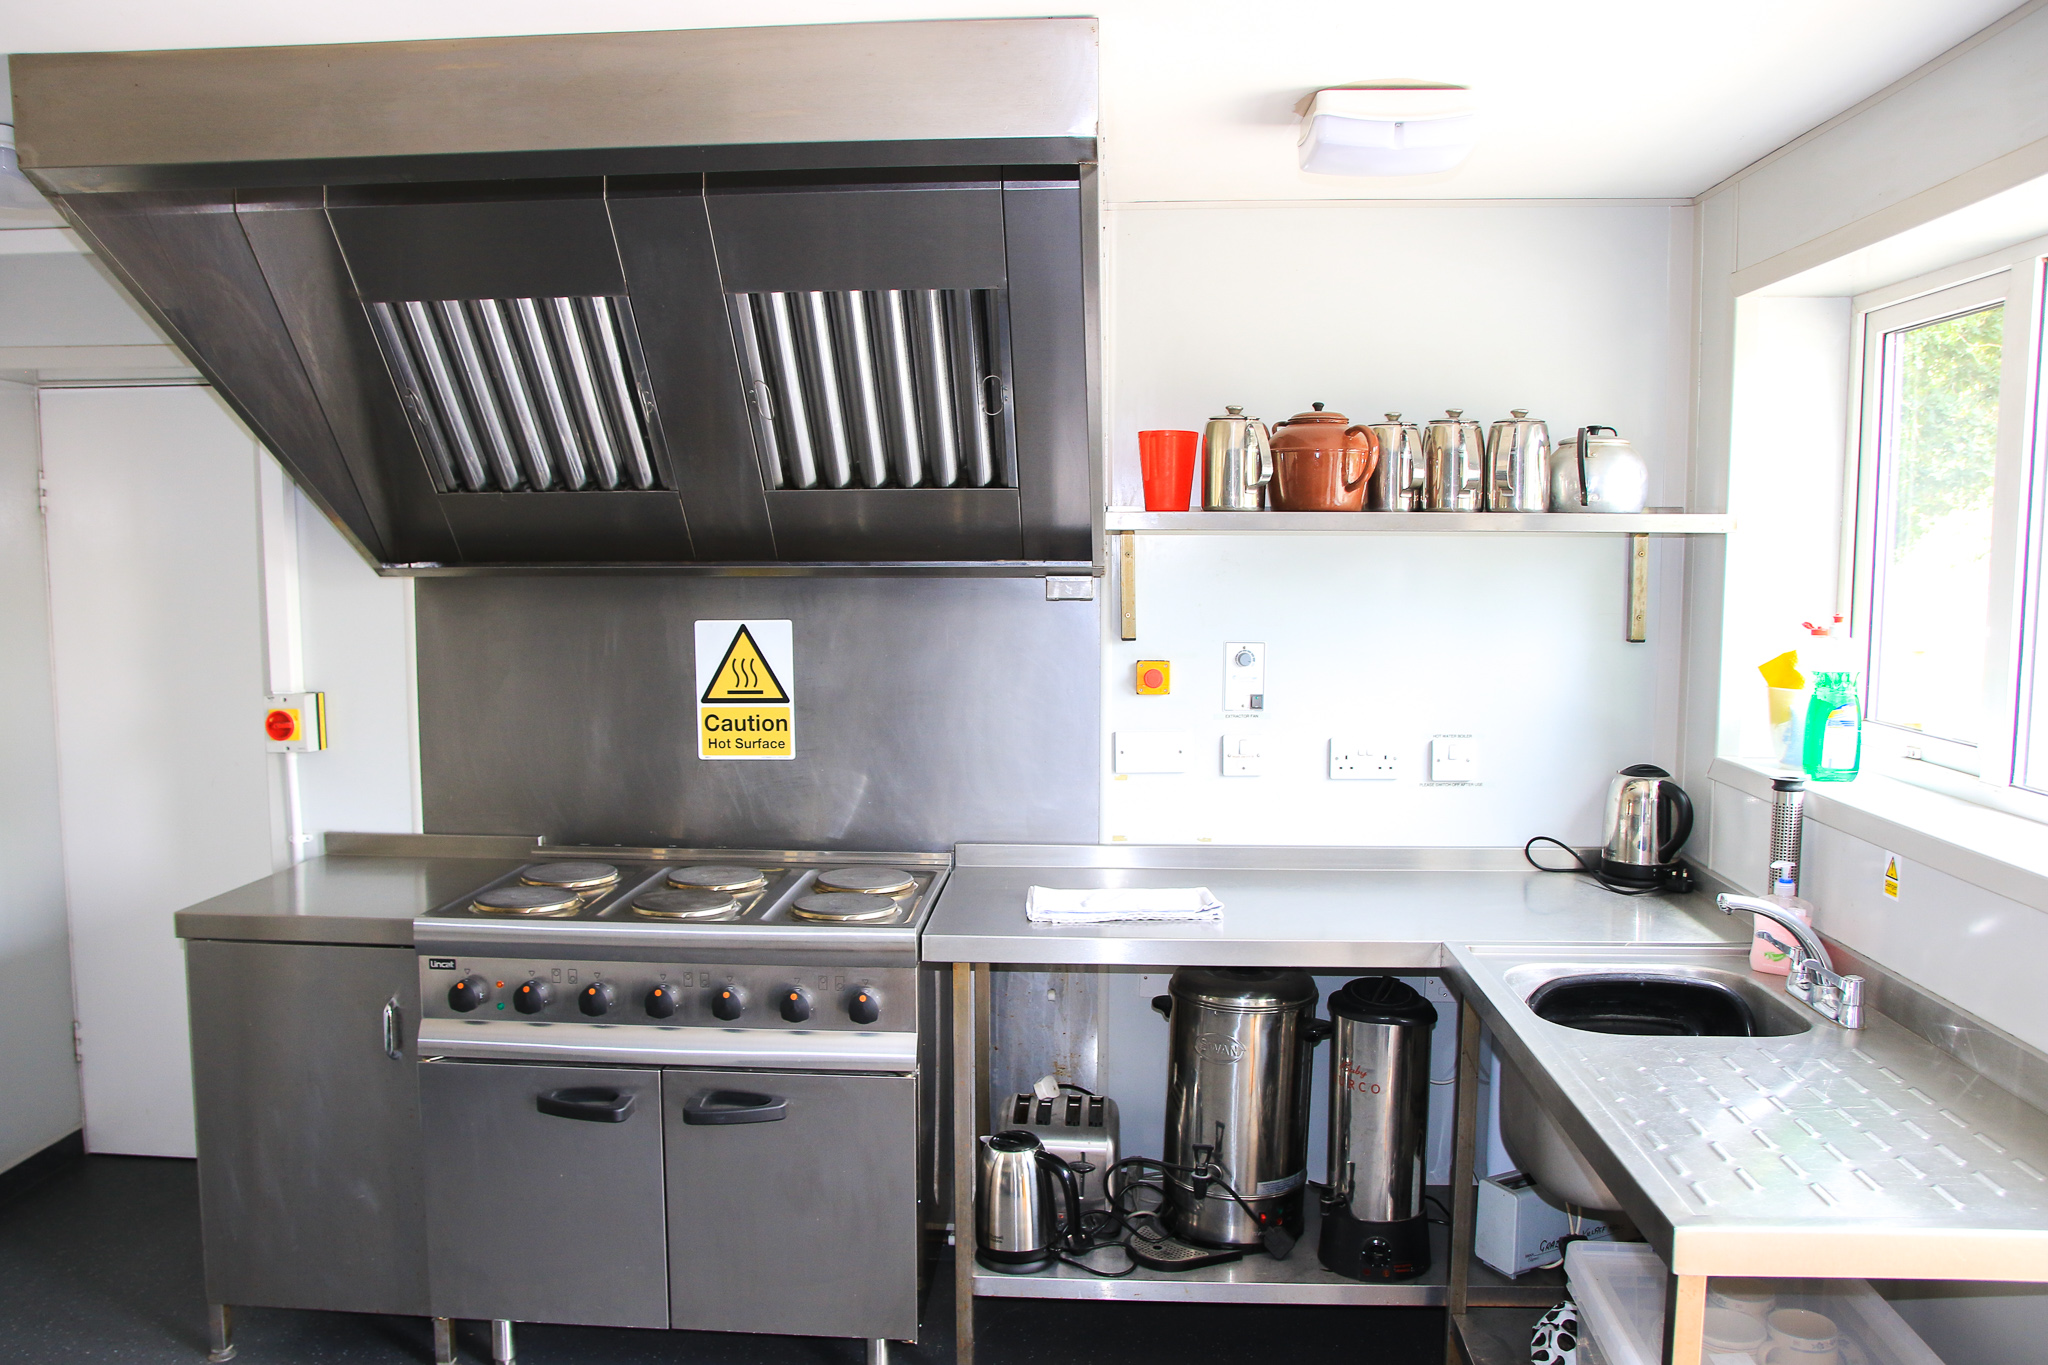 Commercial grade kitchen with electric oven, extractor hood, kettles, hot water urns and toaster